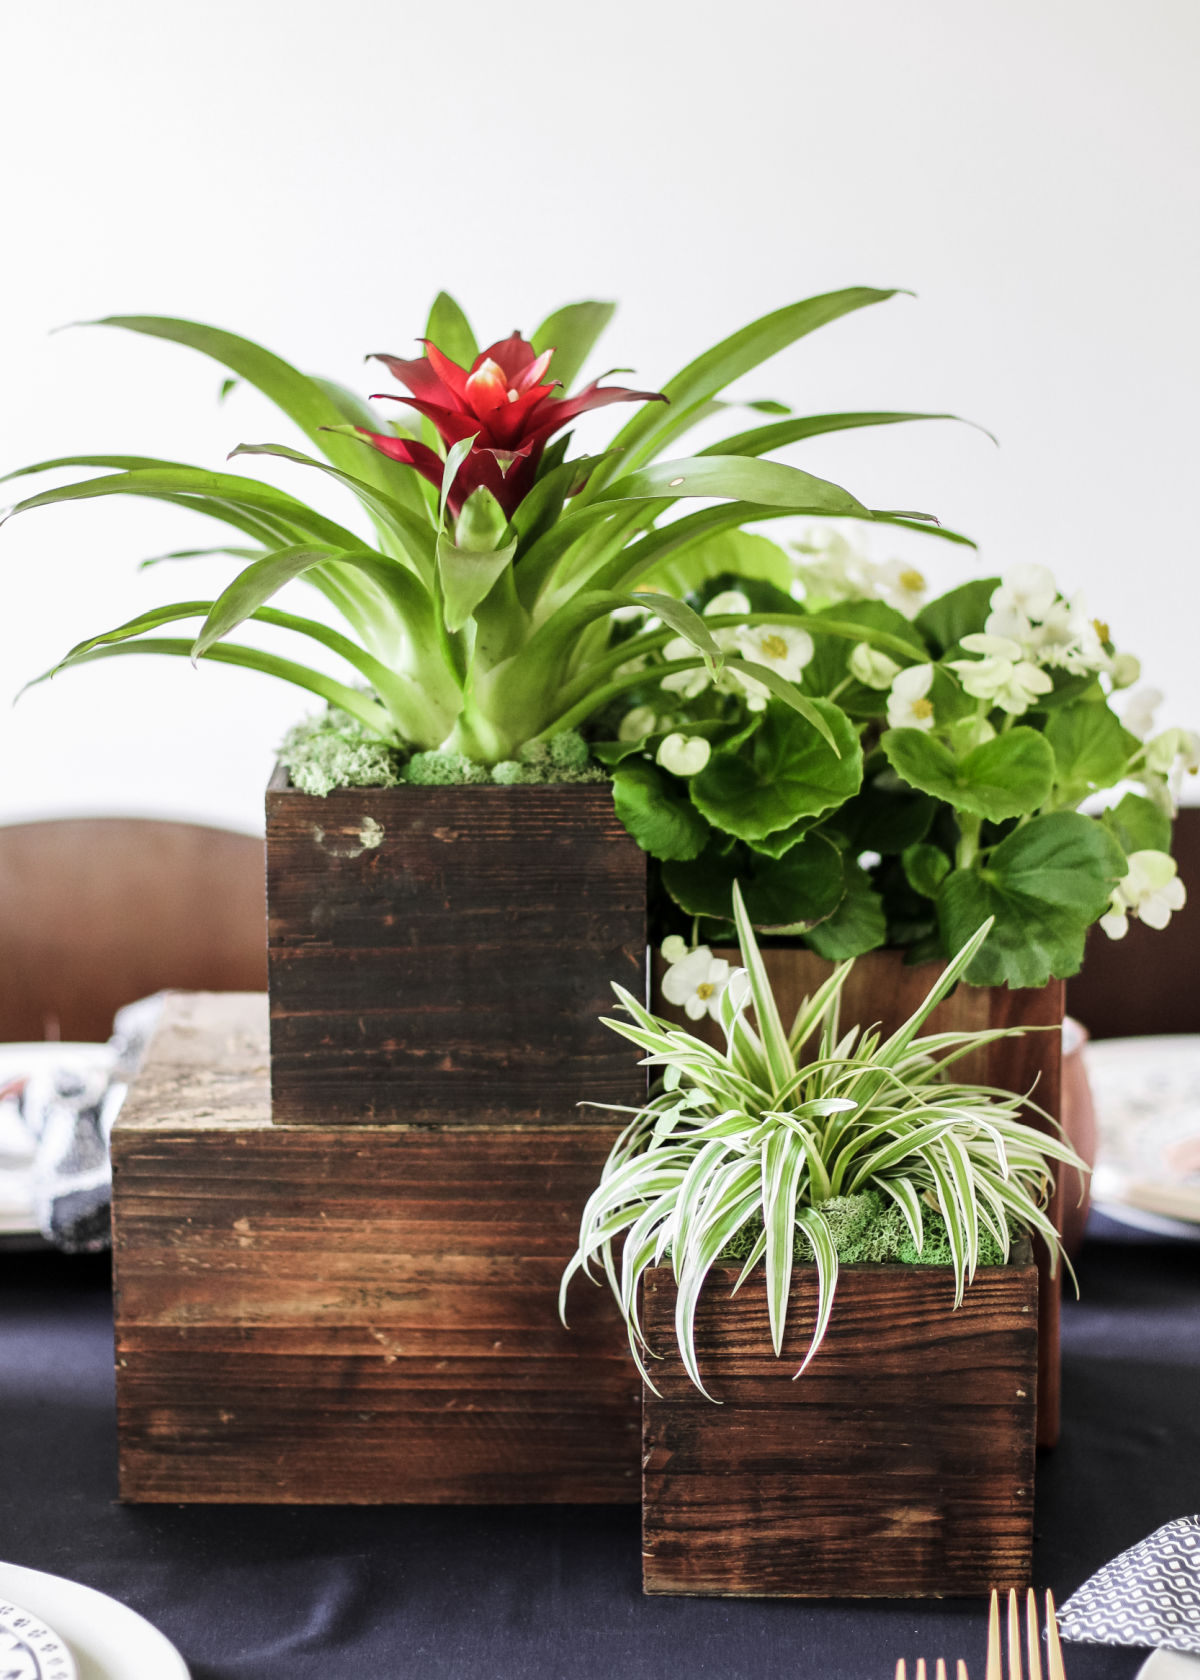 wood blocks as centerpiece with green plants sitting on top.